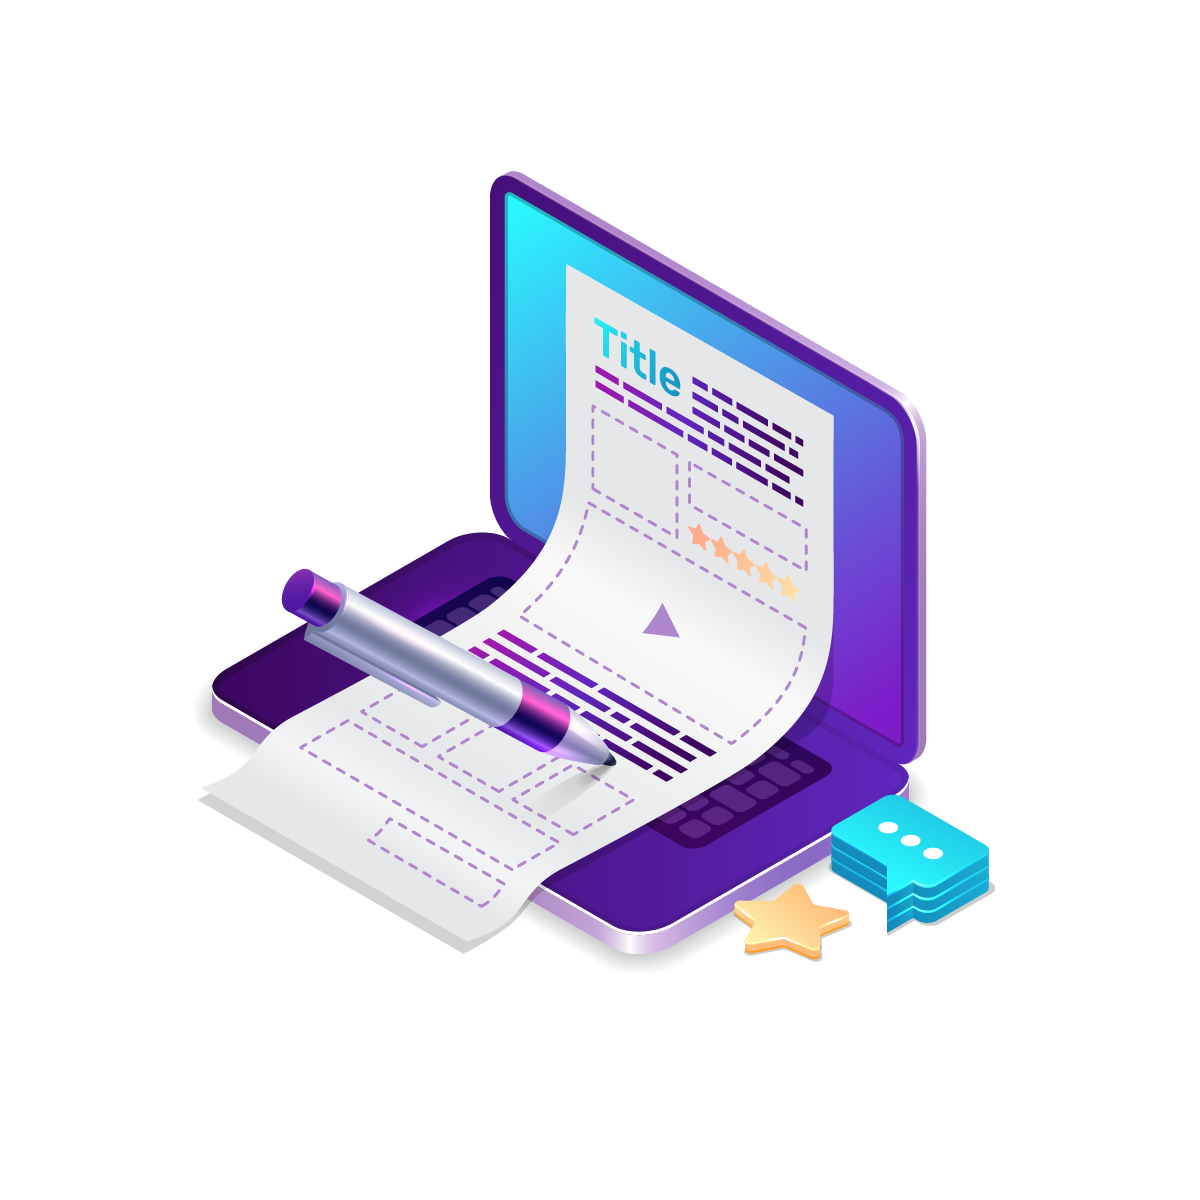 —Pngtree—quality content production isometric isolated_5317156